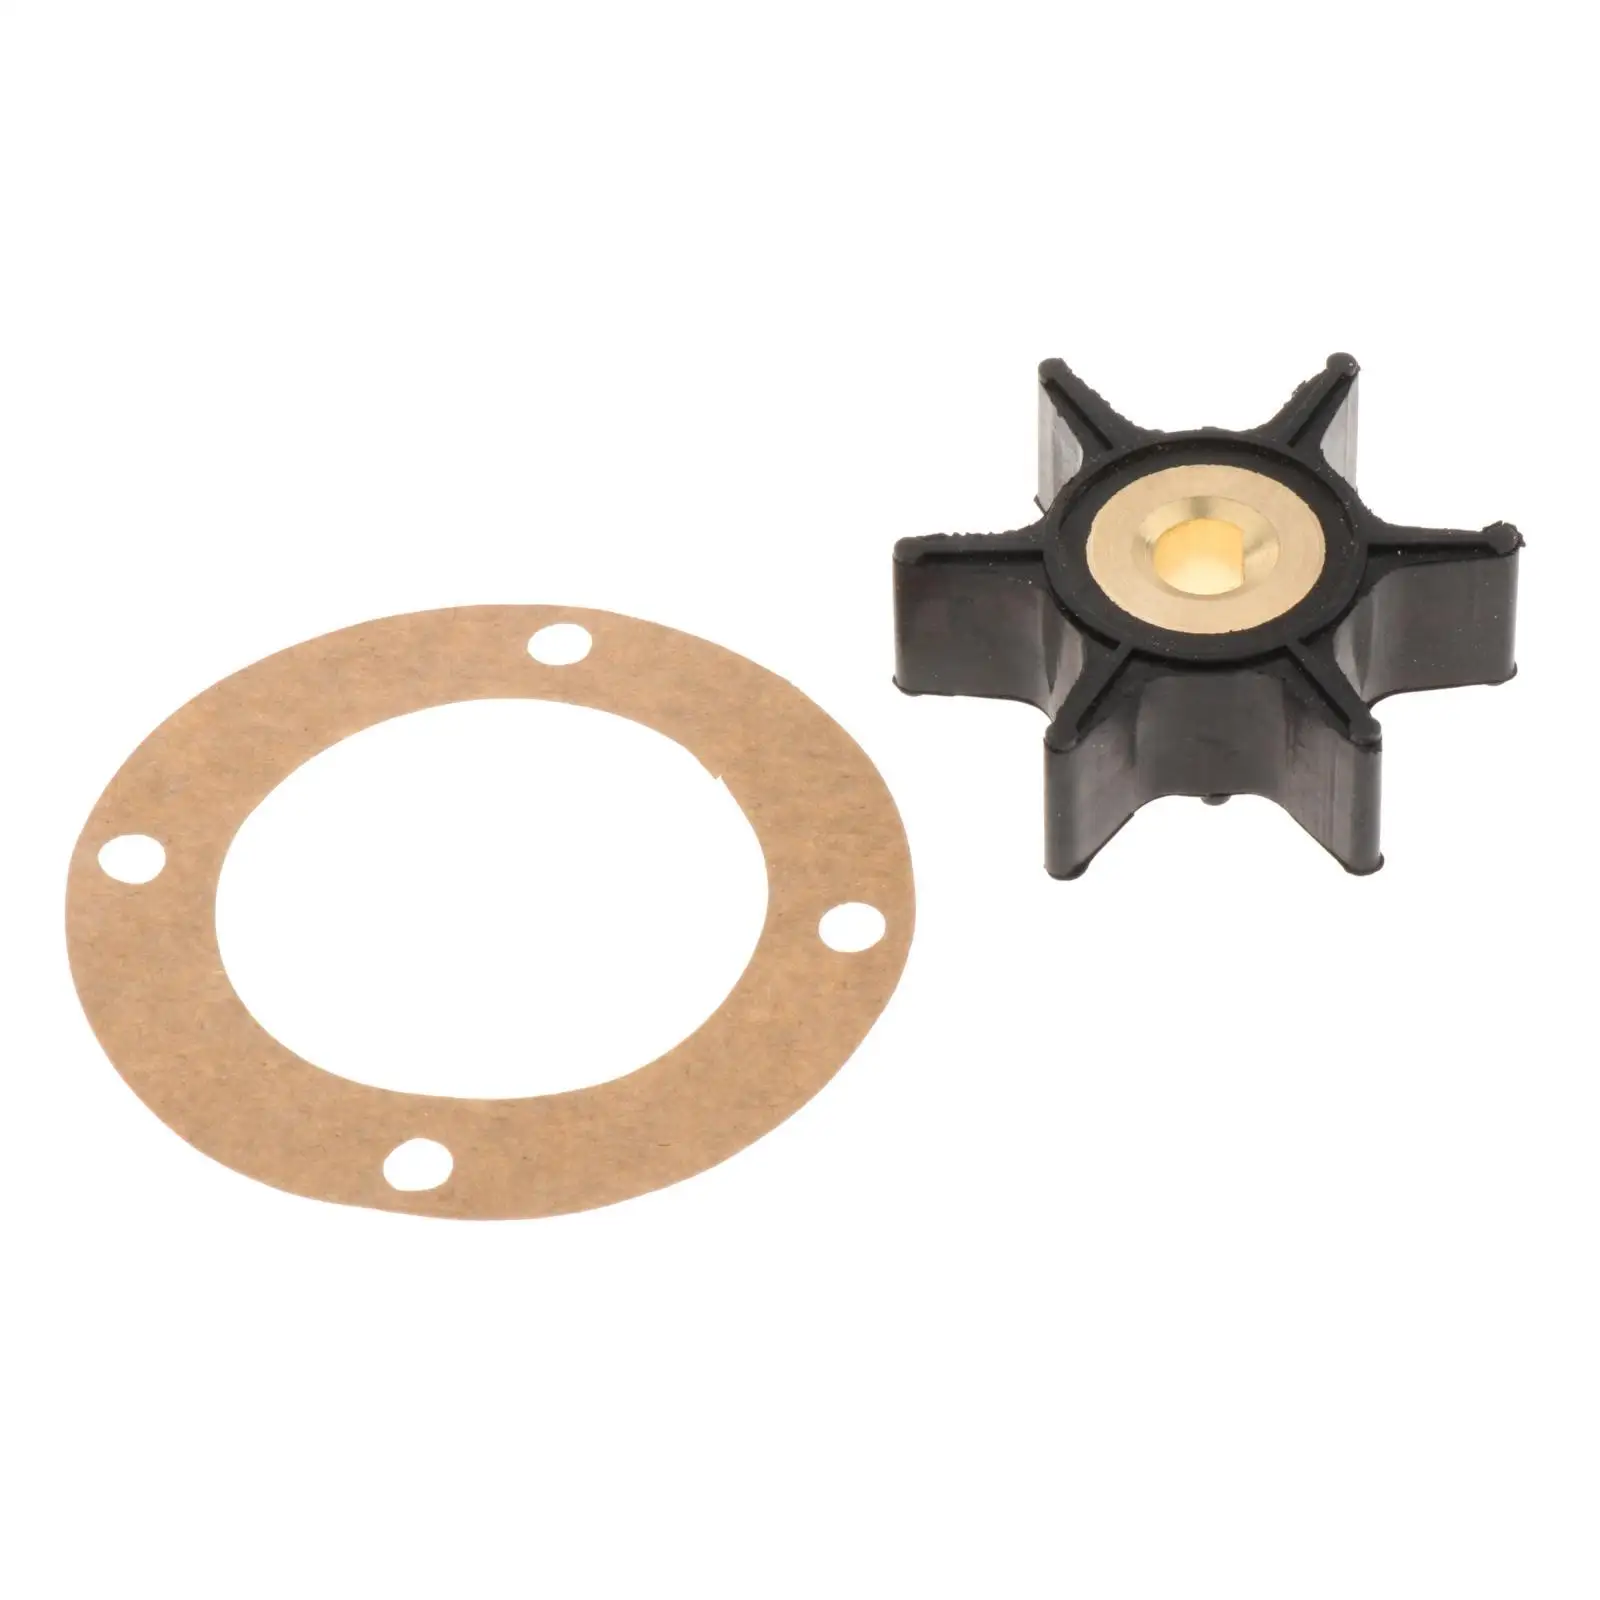 2 Pieces Impeller and 4-Hole Gasket Kit Plastic Replacement Fits for Onan 131-0386 170-3172 131-0257 Water Pump Mcck 4.0 kW